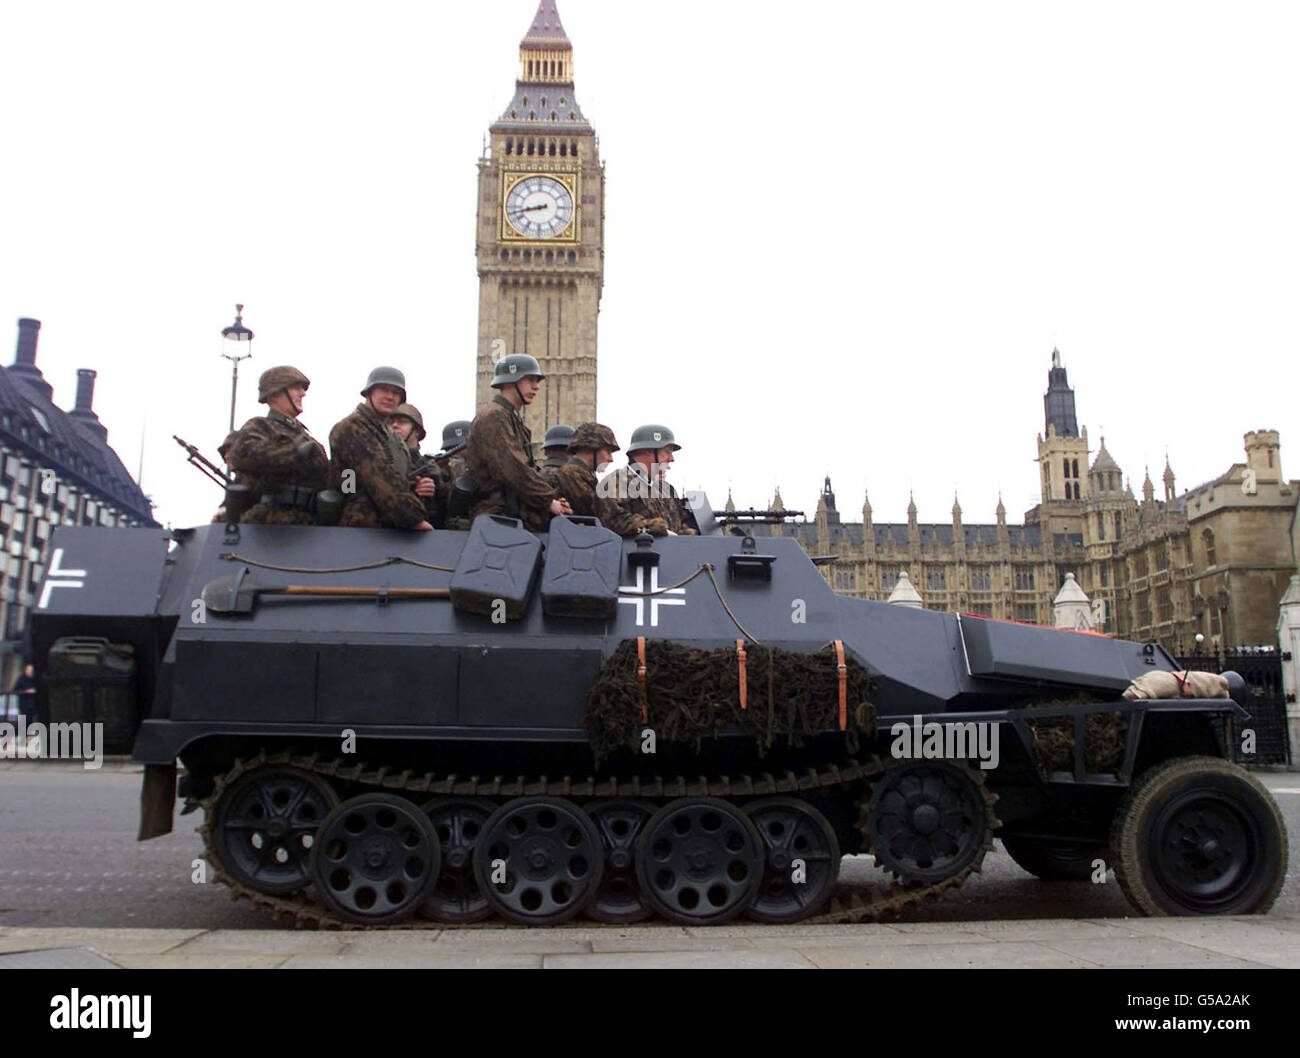 Members of the WW2 re-enactment club 'Second Battle Group' dressed in Waffen-SS uniform ride in a Sdkfz 251 half-track in Parliament Square, London. For only the 2nd time ever, the London street was closed to traffic to allow filming for a major new BBC documentary series. * Invasion, which examines Britain's history of defence will be presented by Dan Cruikshank on BBC2 in the Spring. Stock Photo